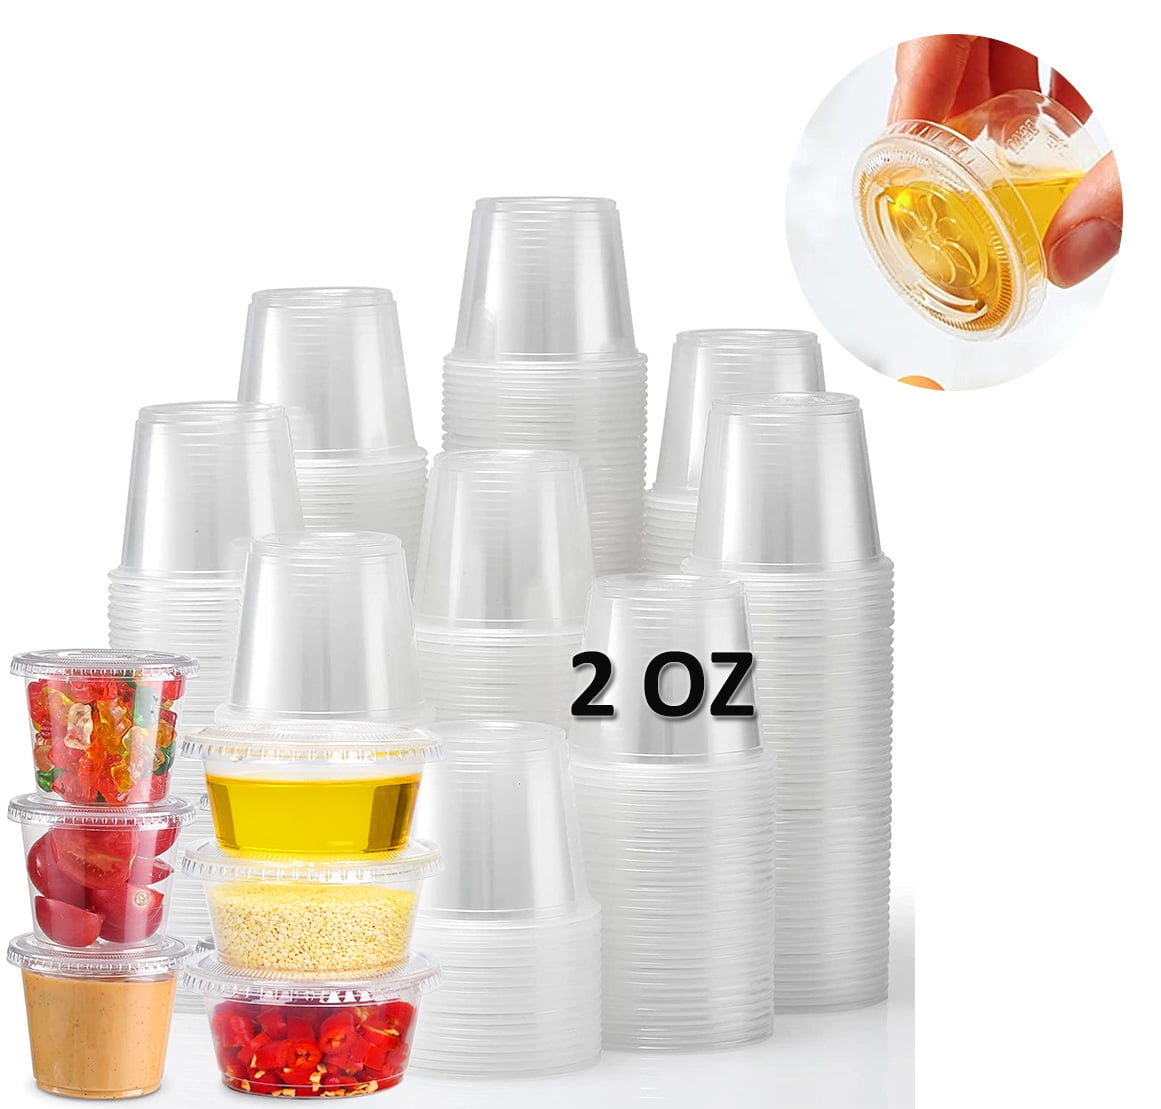 Small Plastic Containers with Lids, Jello Shot Cups - 200 Sets - 2 oz